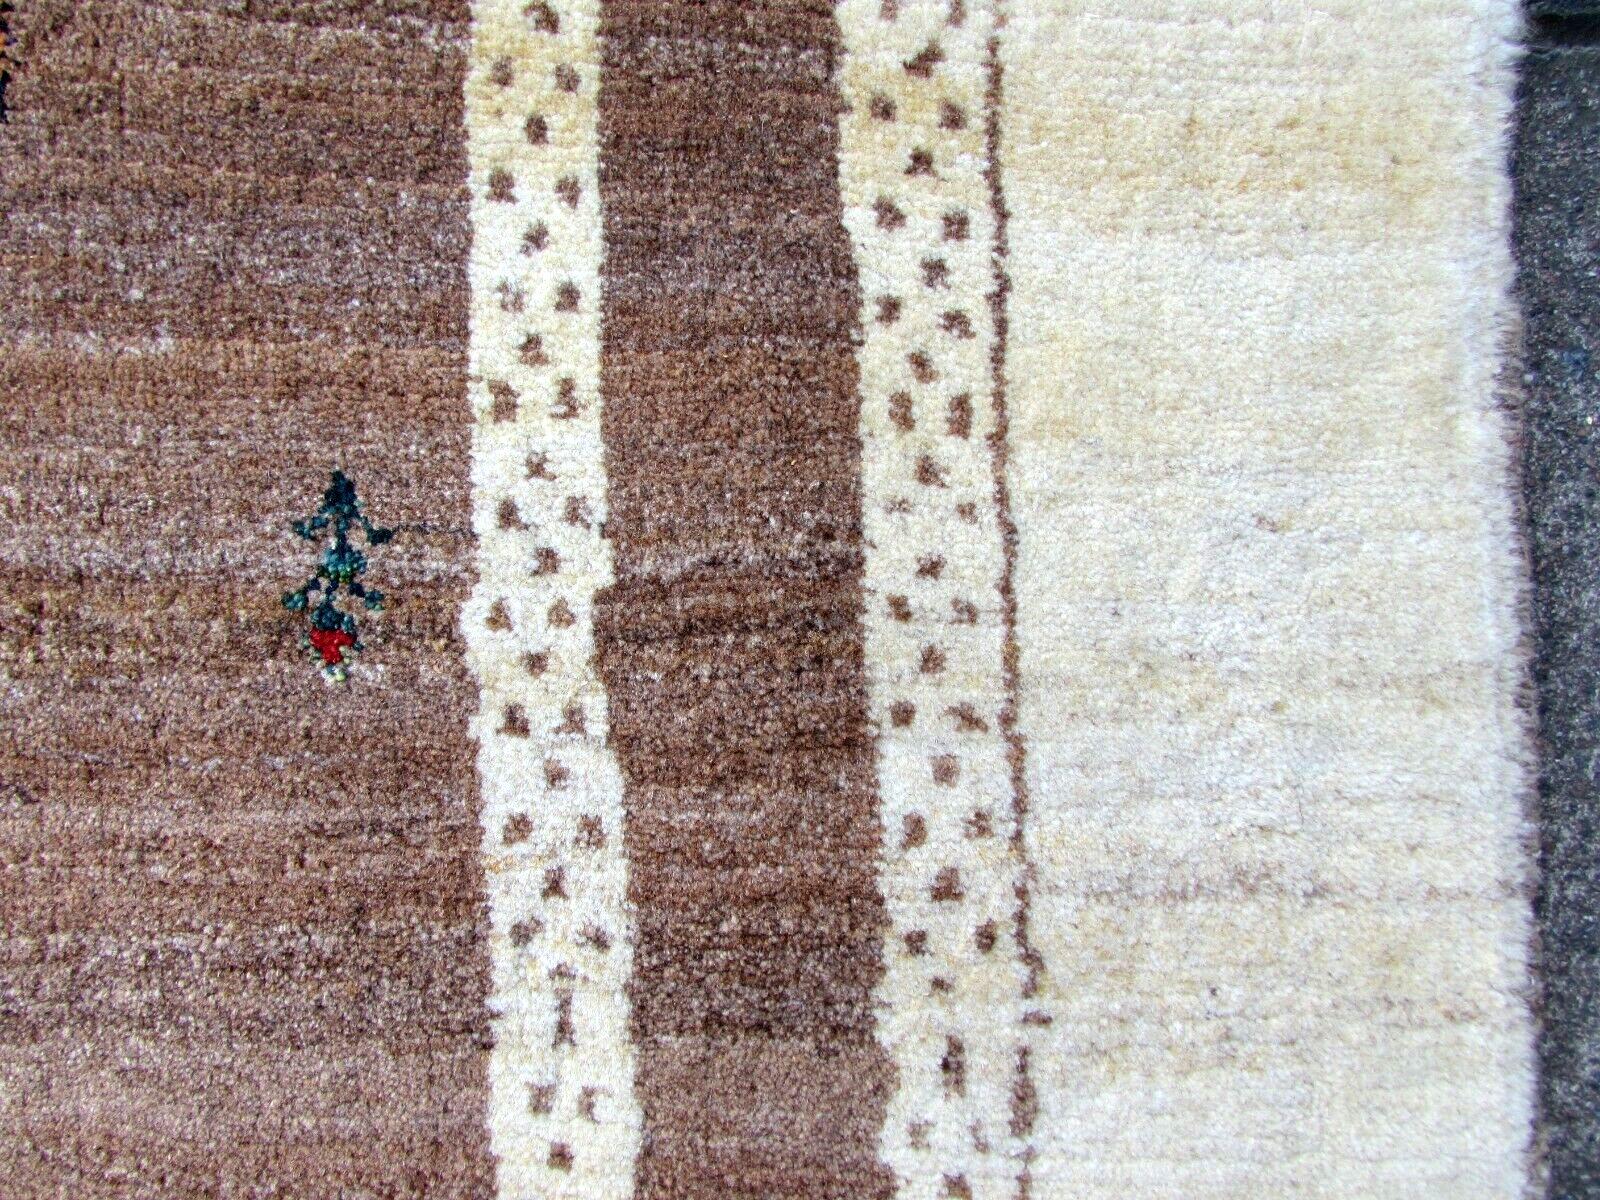 Handmade vintage Gabbeh rug in brown and beige wool. The rug is from the end of 20th century in original good condition.

- Condition: Original good,

- circa 1970s,

- Size: 3.7' x 5' (114cm x 153cm),

- Material: Wool,

- Country of